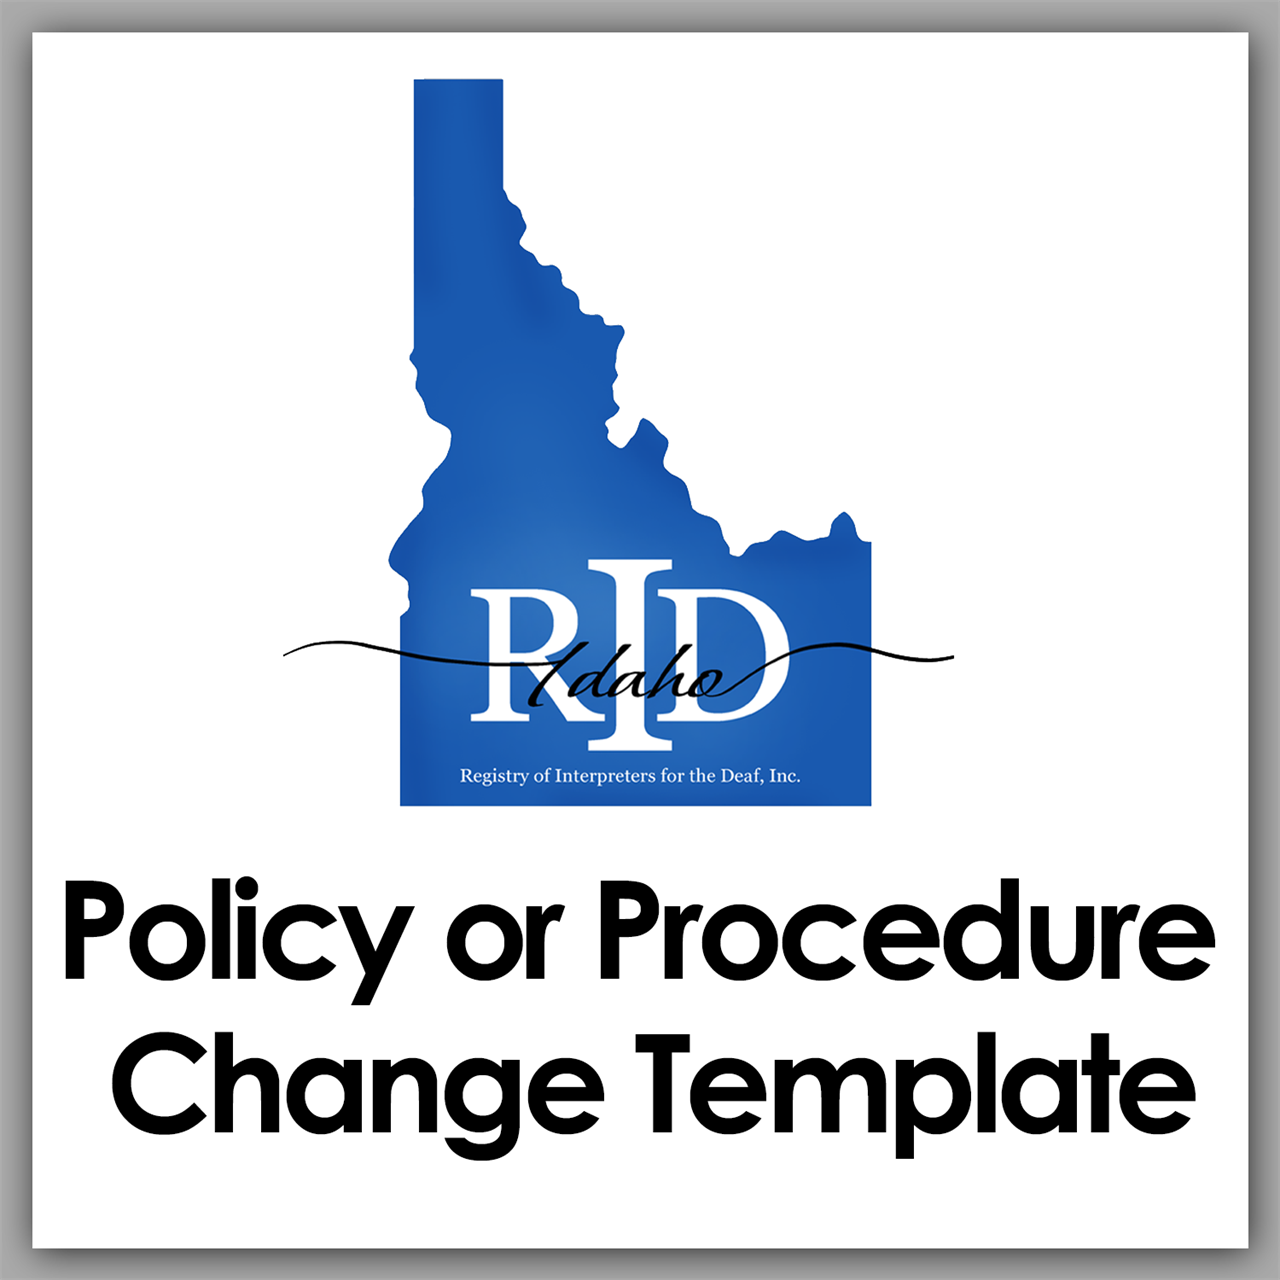 Policy or Procedure Change Request Button